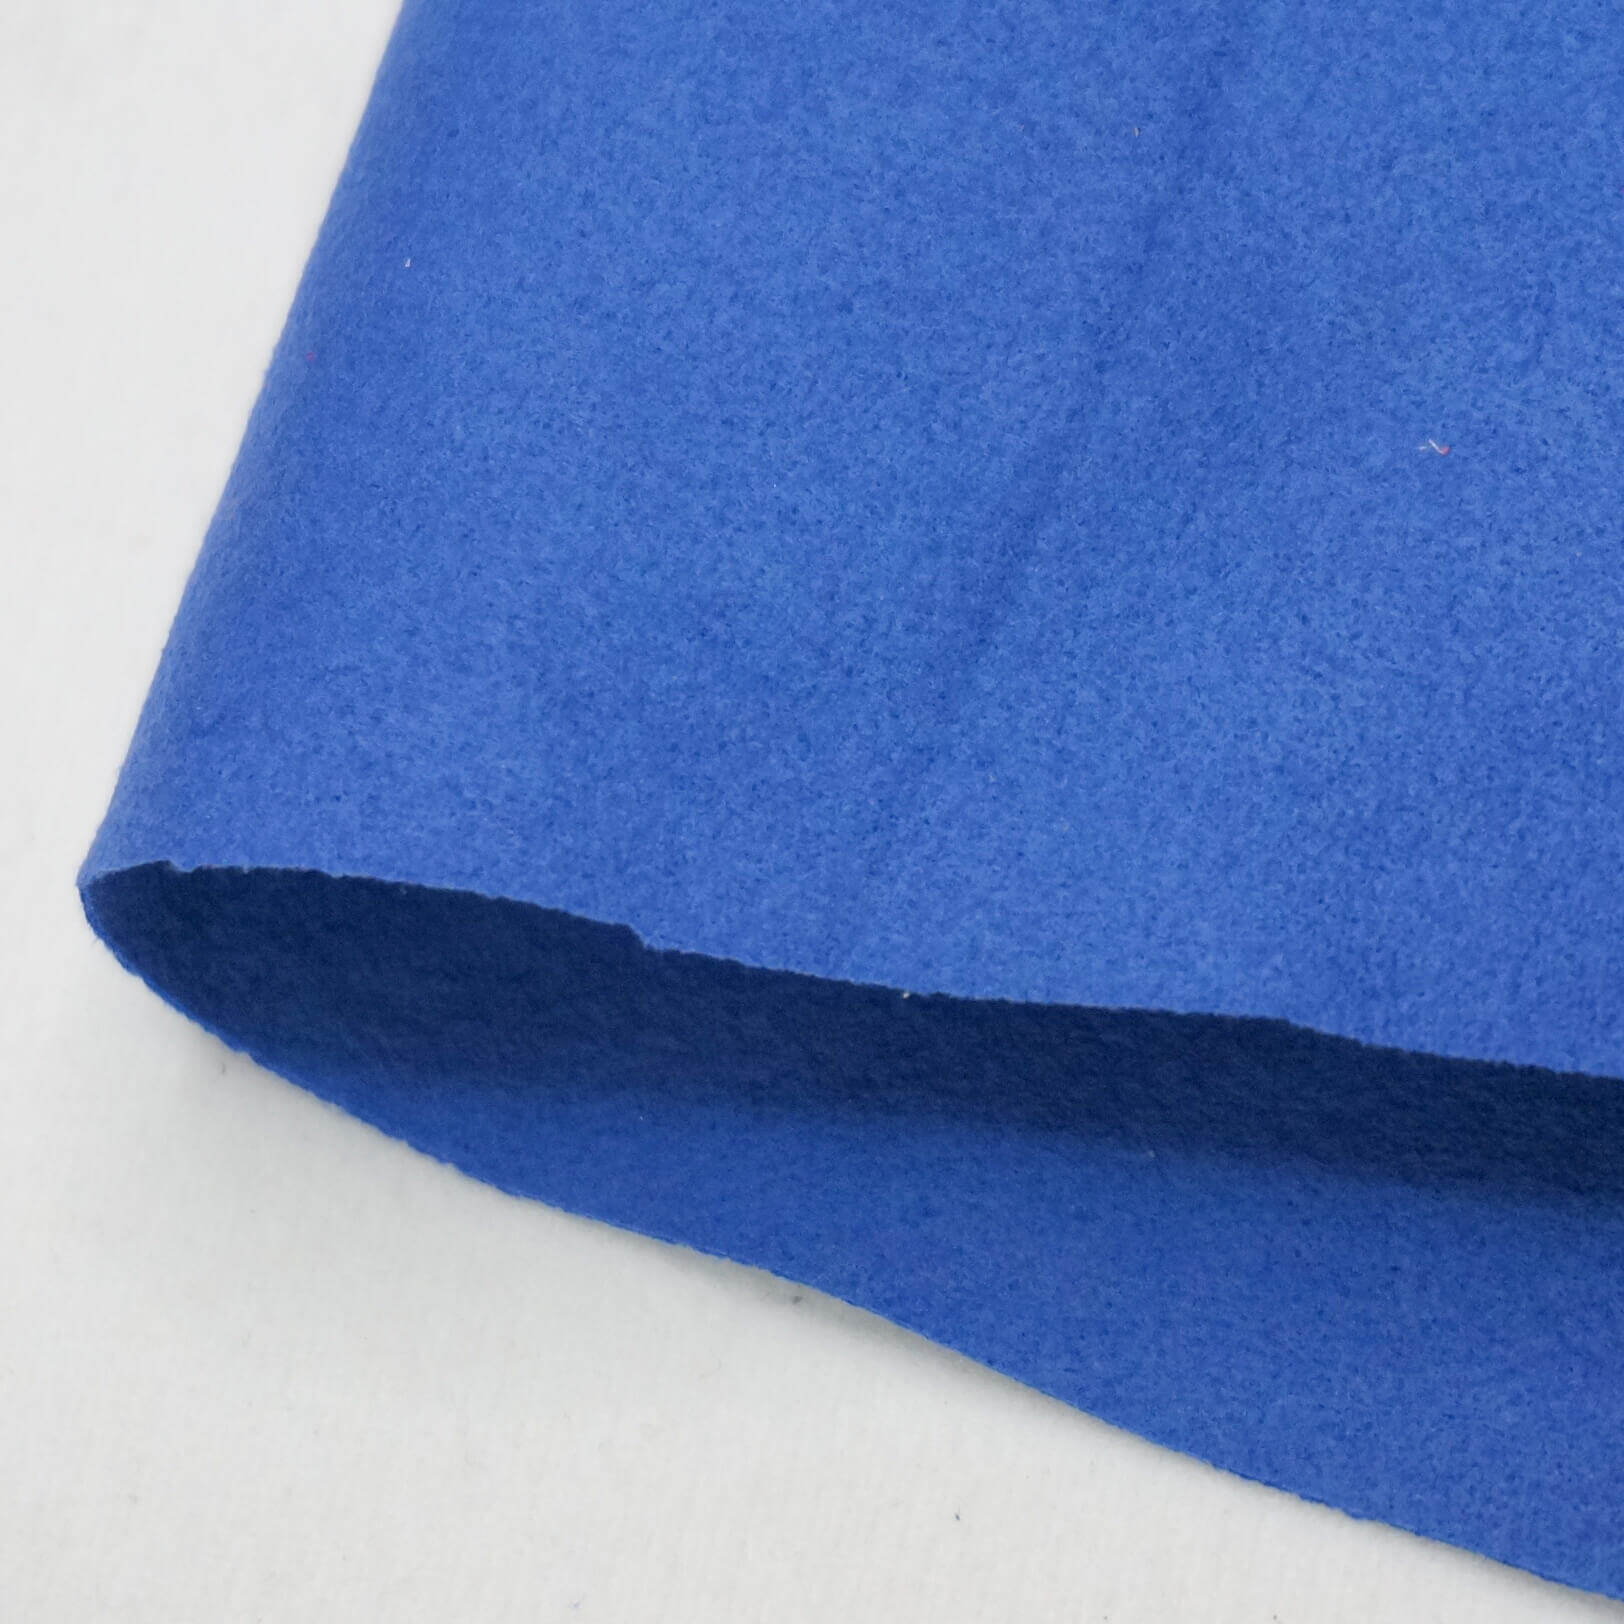 microfiber upholstery fabric for sale, microfiber ultrasuede upholstery fabric